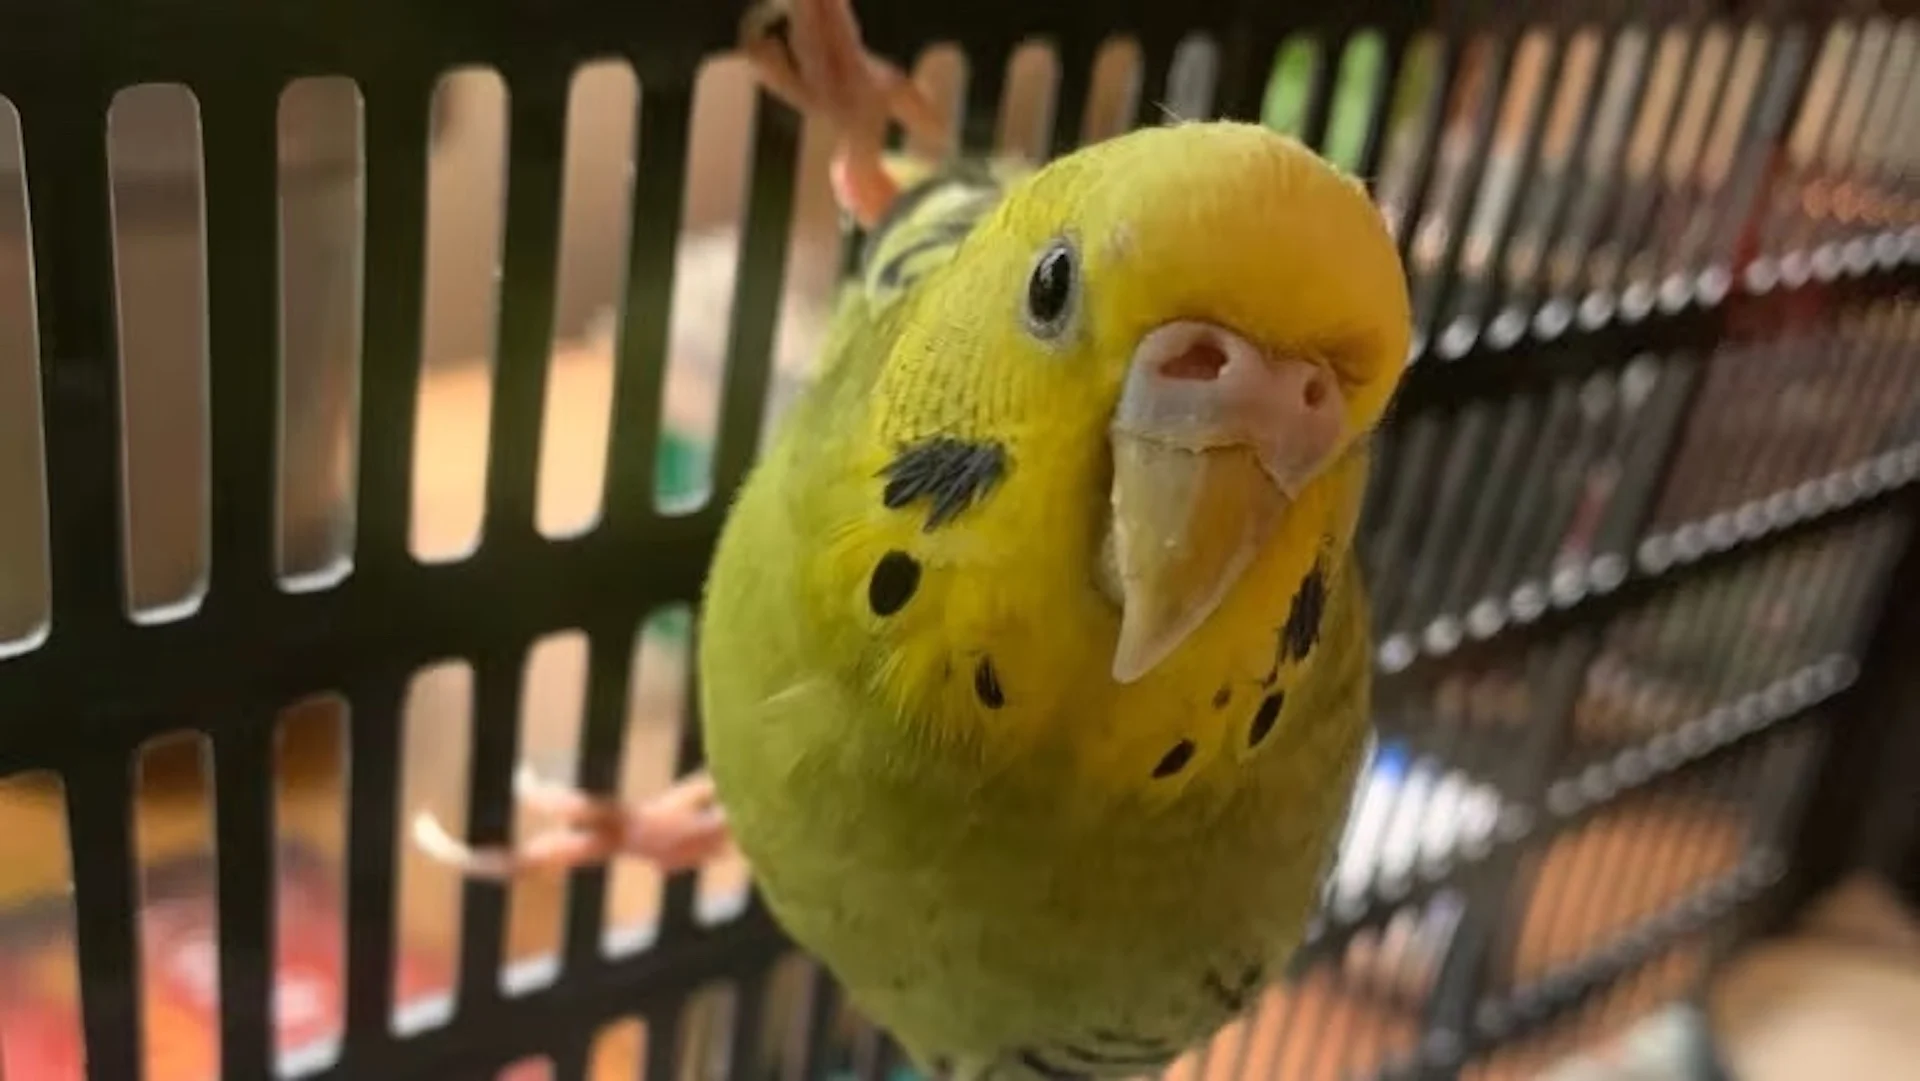 B.C. bird rescuers reporting an unusual surge in escaped budgies